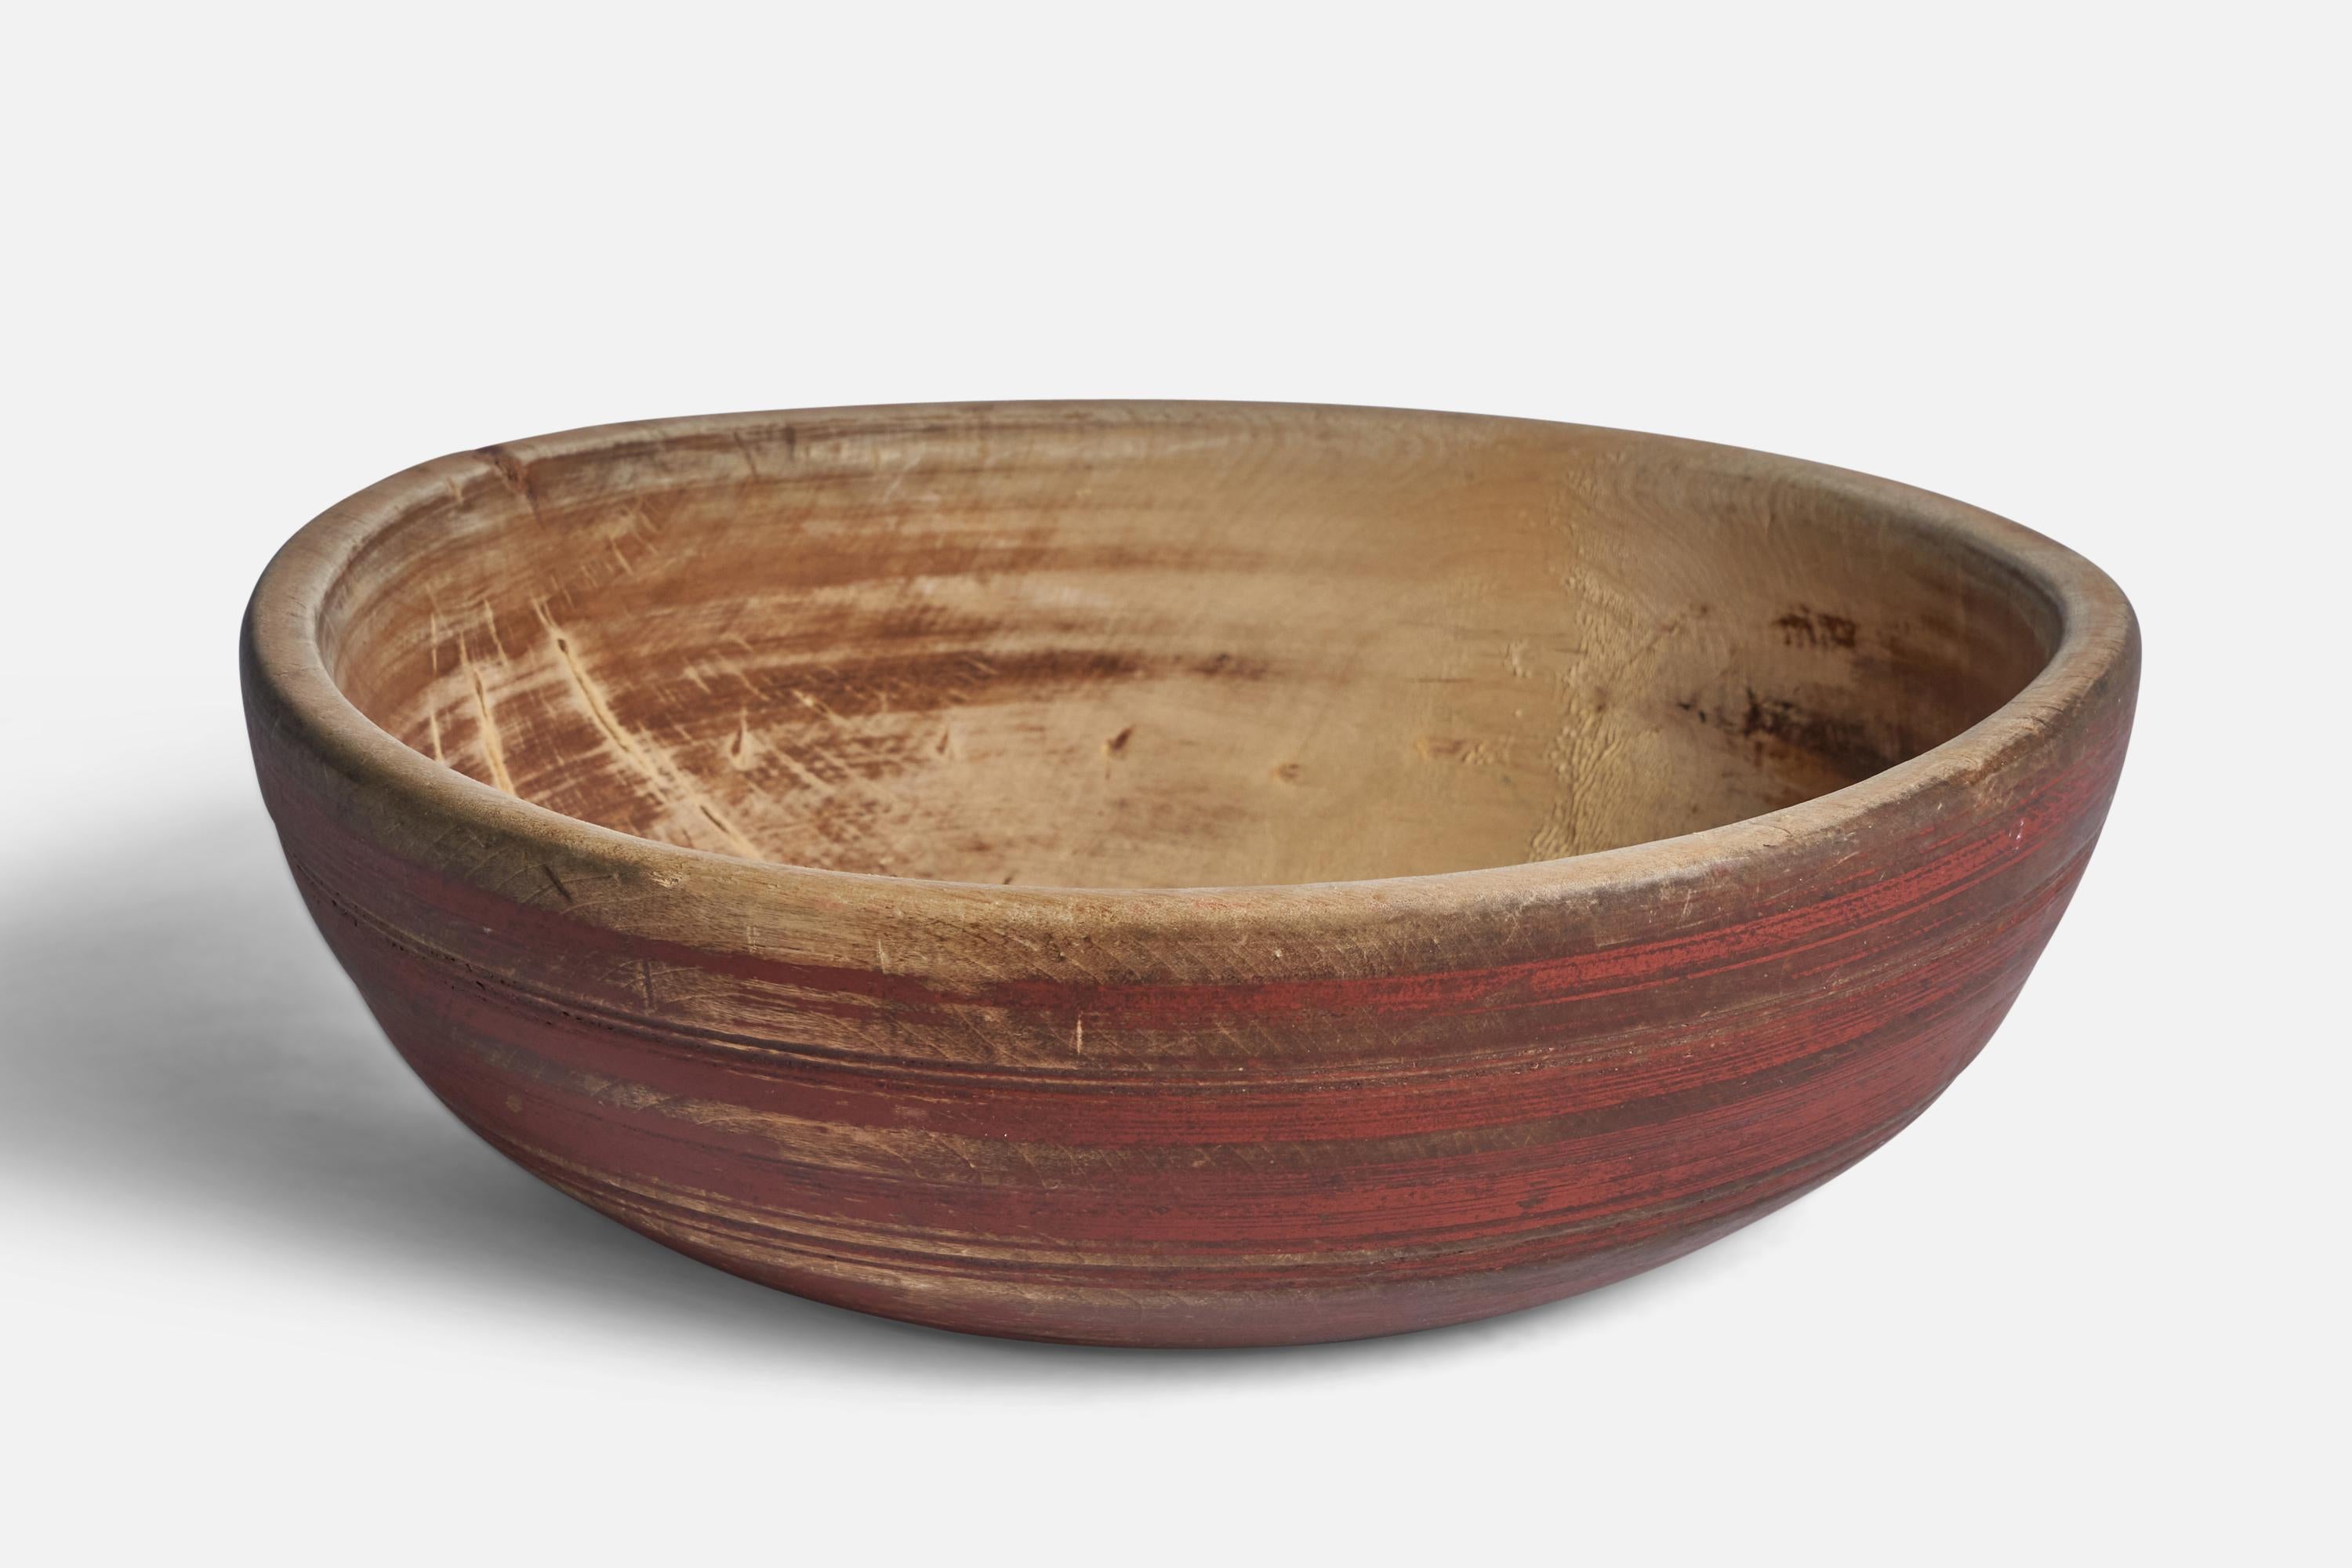 A red-painted wood bowl produced in Sweden, 19th Century